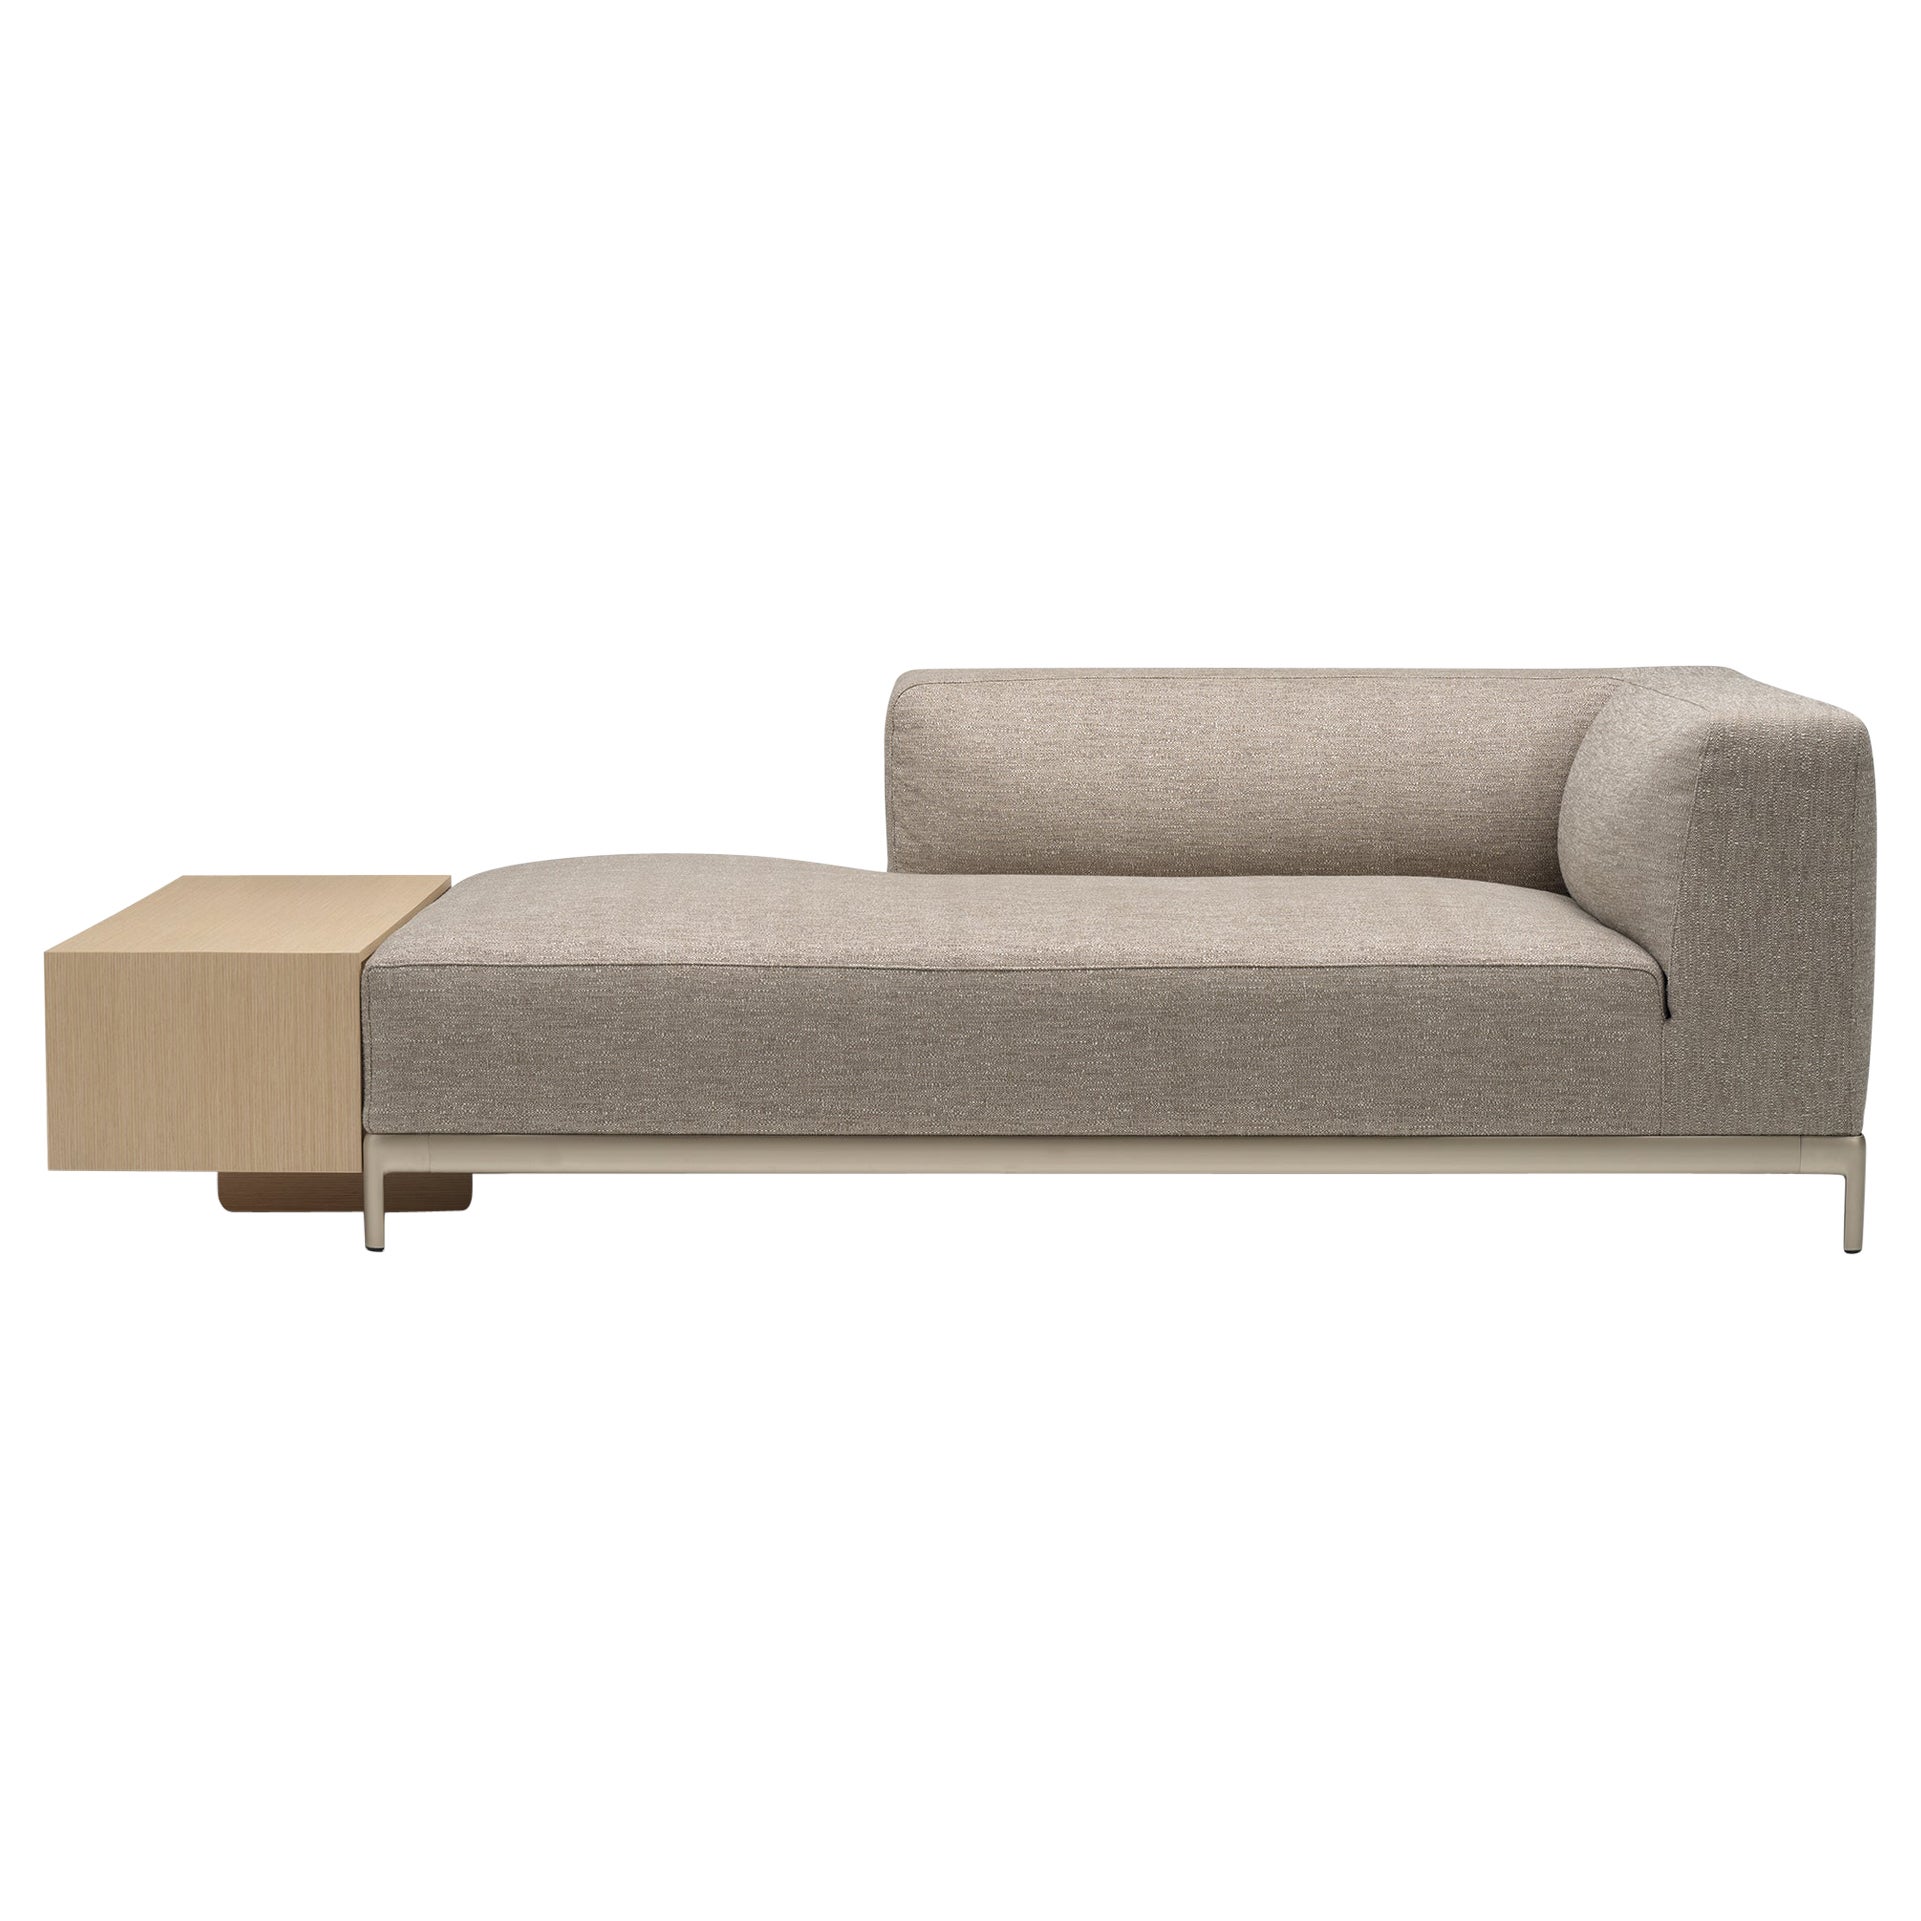 Alias P38 + P54 AluZen Angular Sofa with Box in Brown & Anodized Gold Frame For Sale